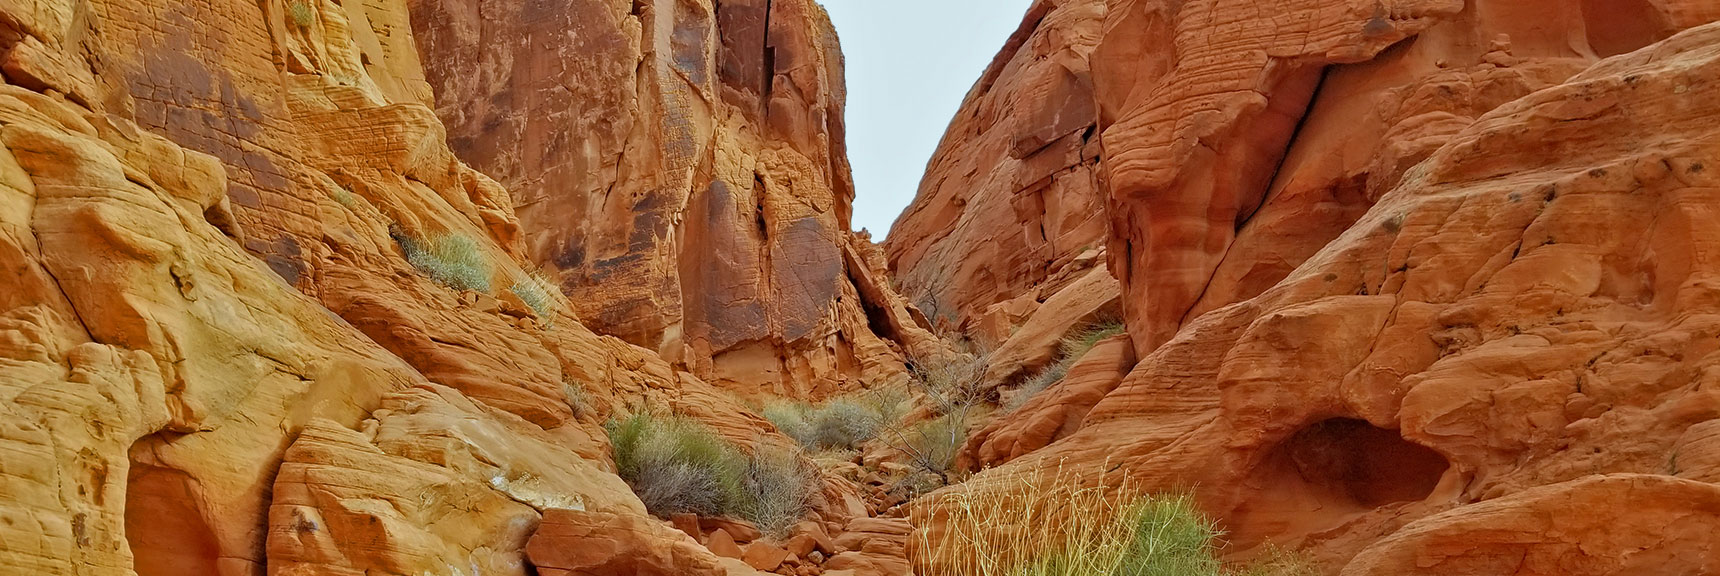 Canyon Continues to Narrow Then Widen in Fire Canyon in Valley of Fire State Park, Nevada